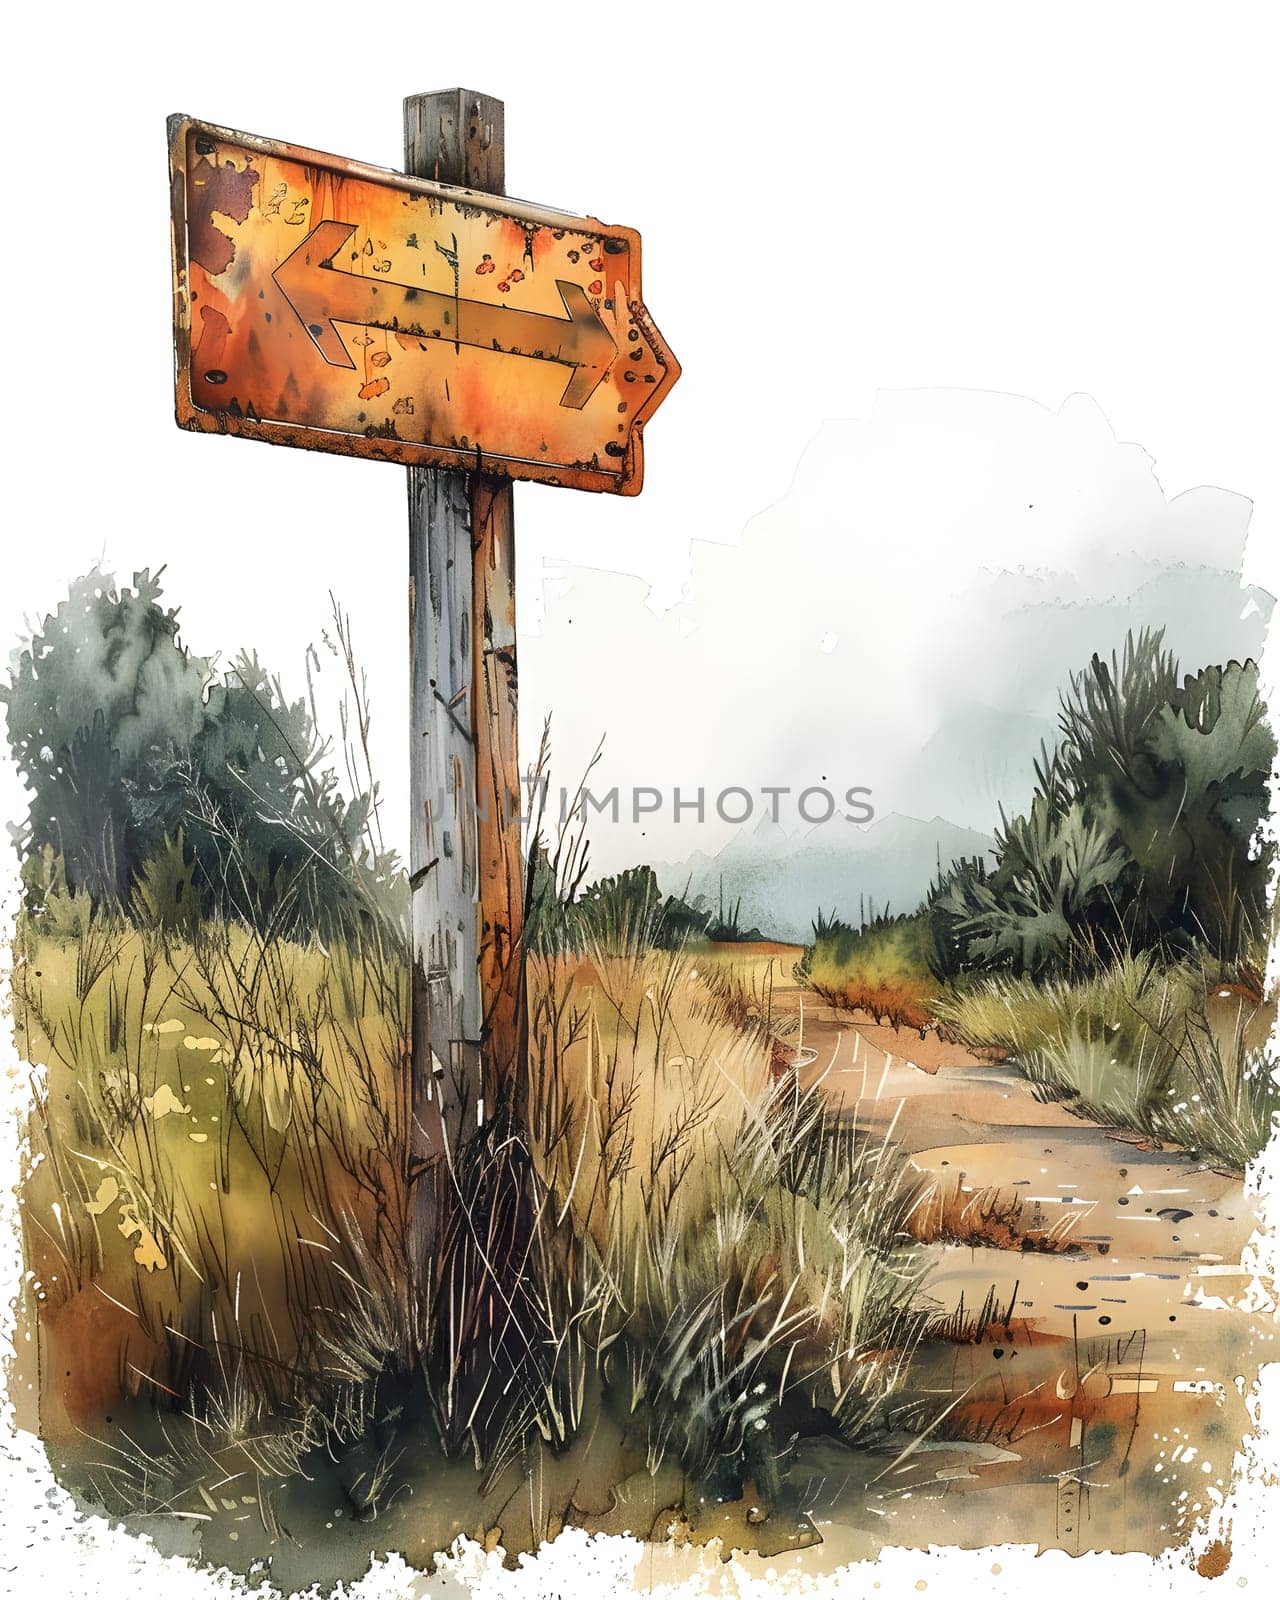 An art piece depicting a road in a natural landscape ecoregion with a sign pointing right. The painting includes sky, plants, grass, and wood elements